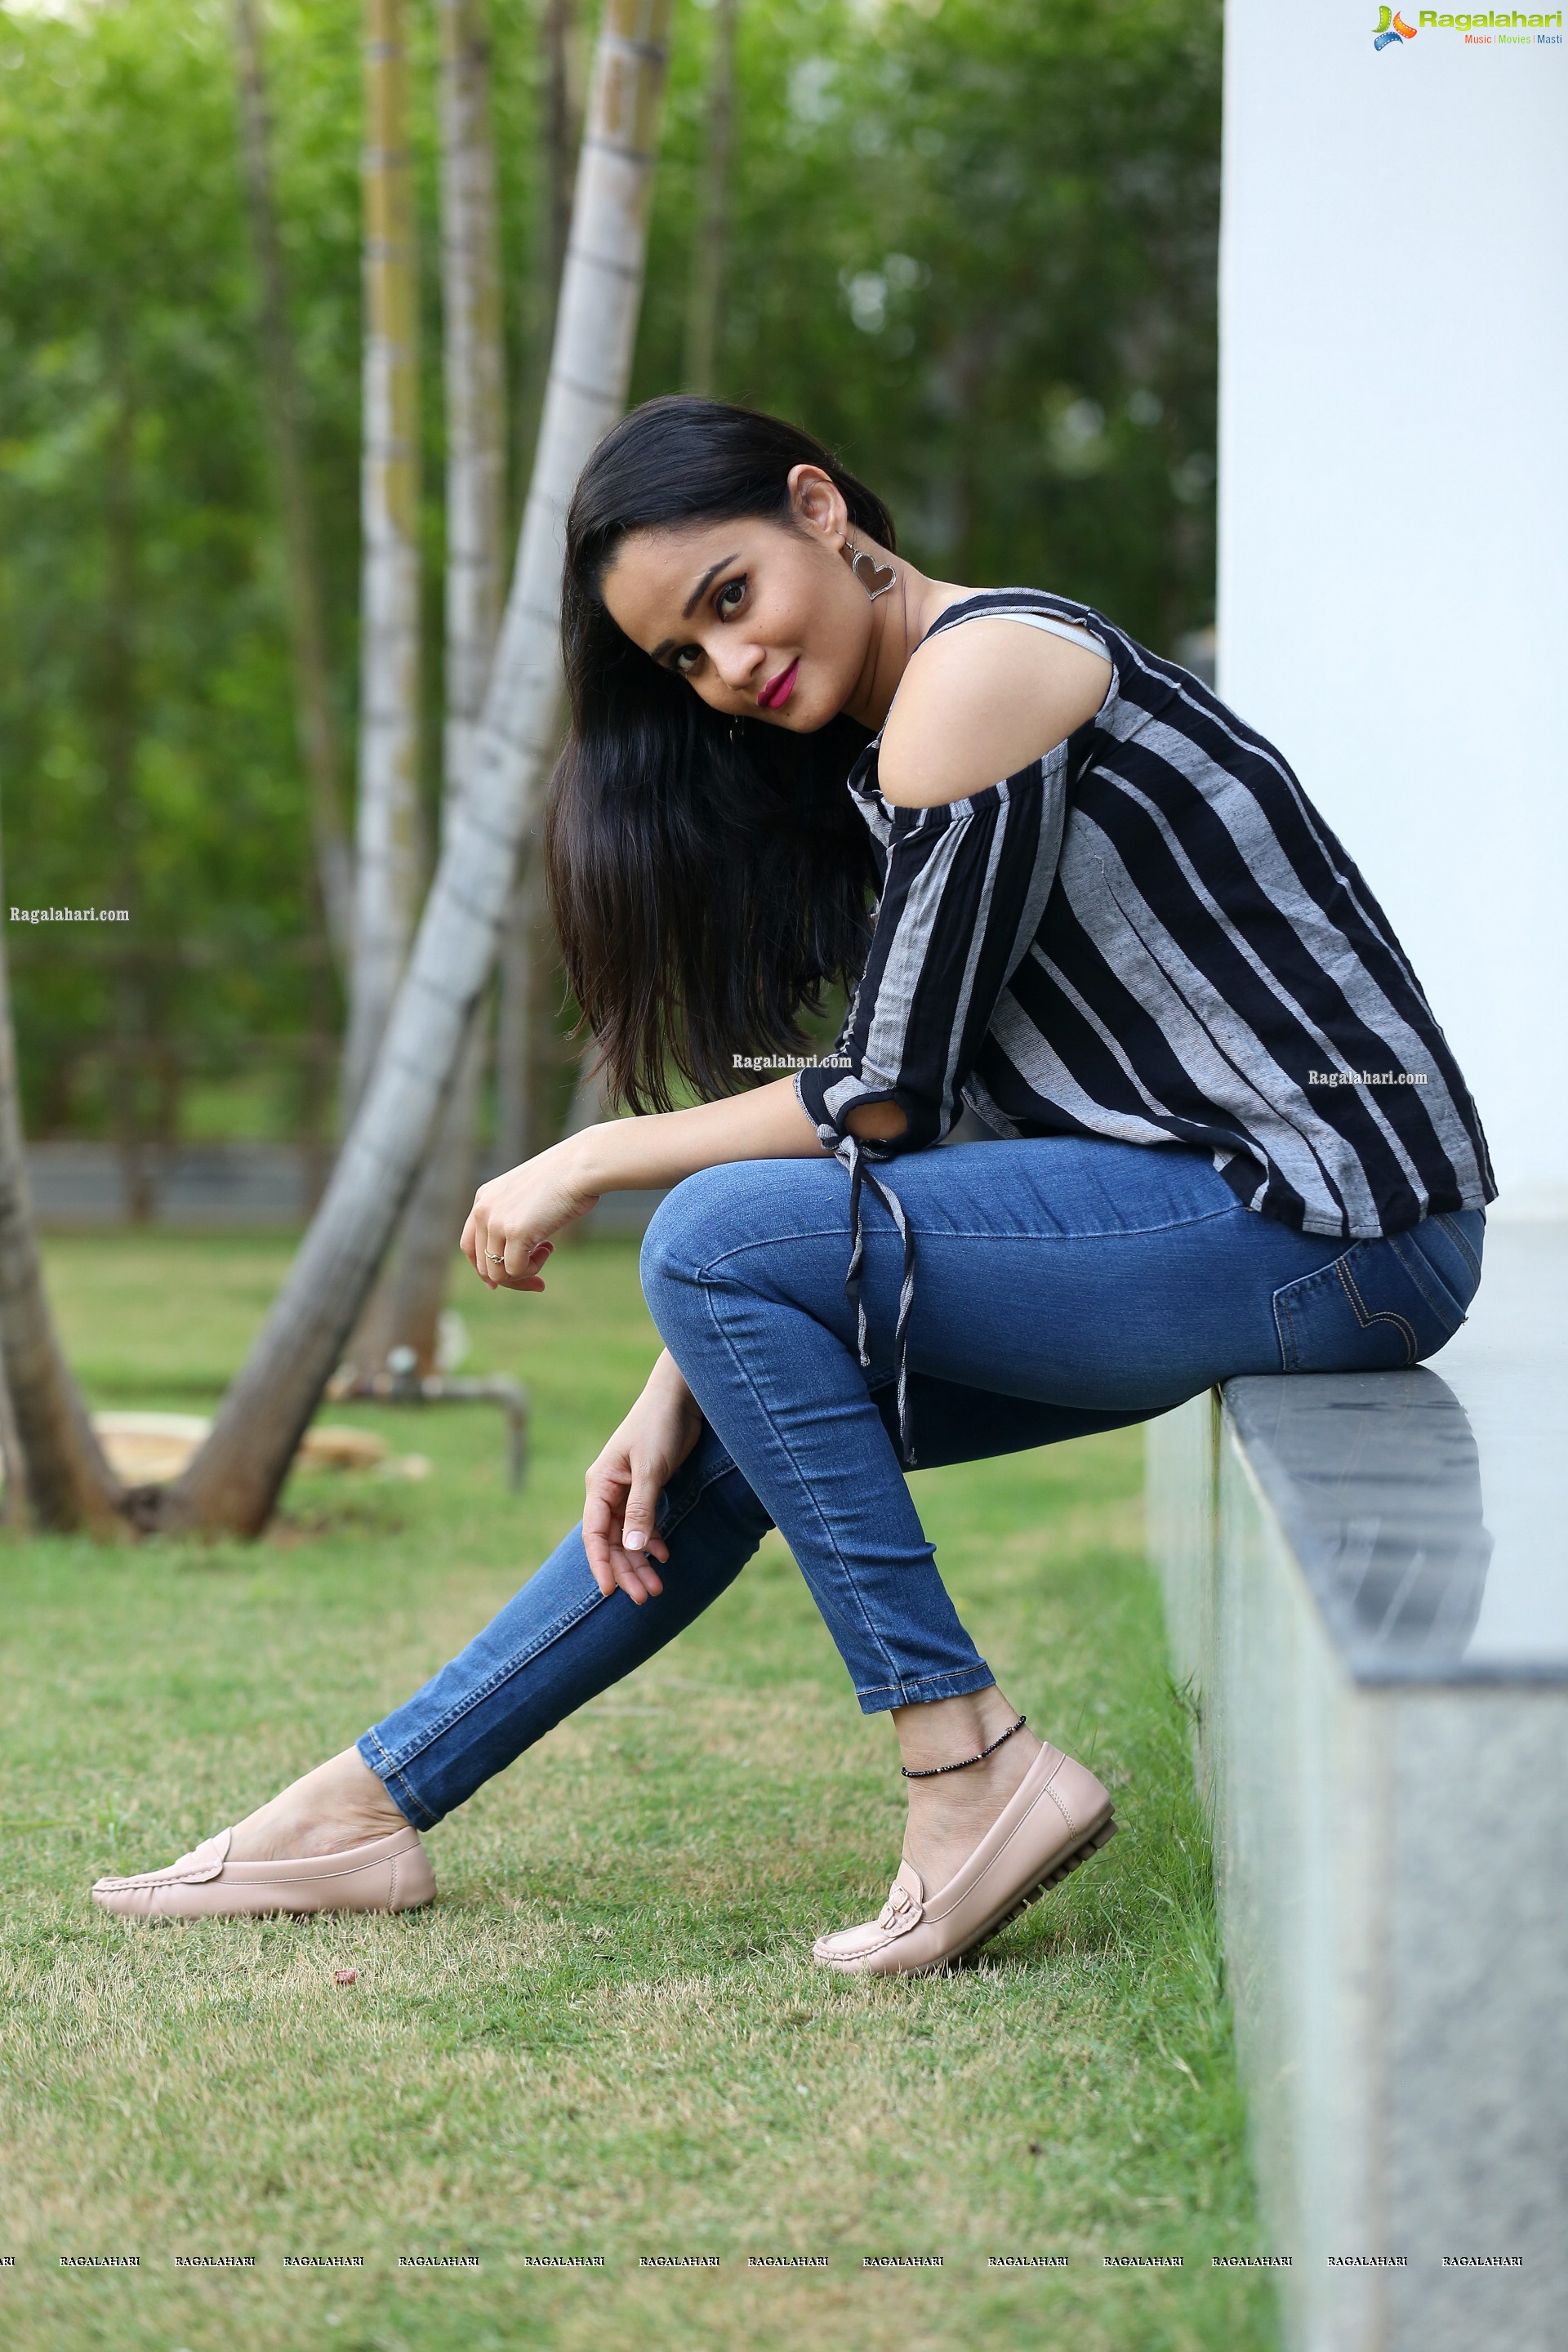 Usha Kurapati in Grey And Black Stripes Cold Shoulders Top, HD Photo Gallery